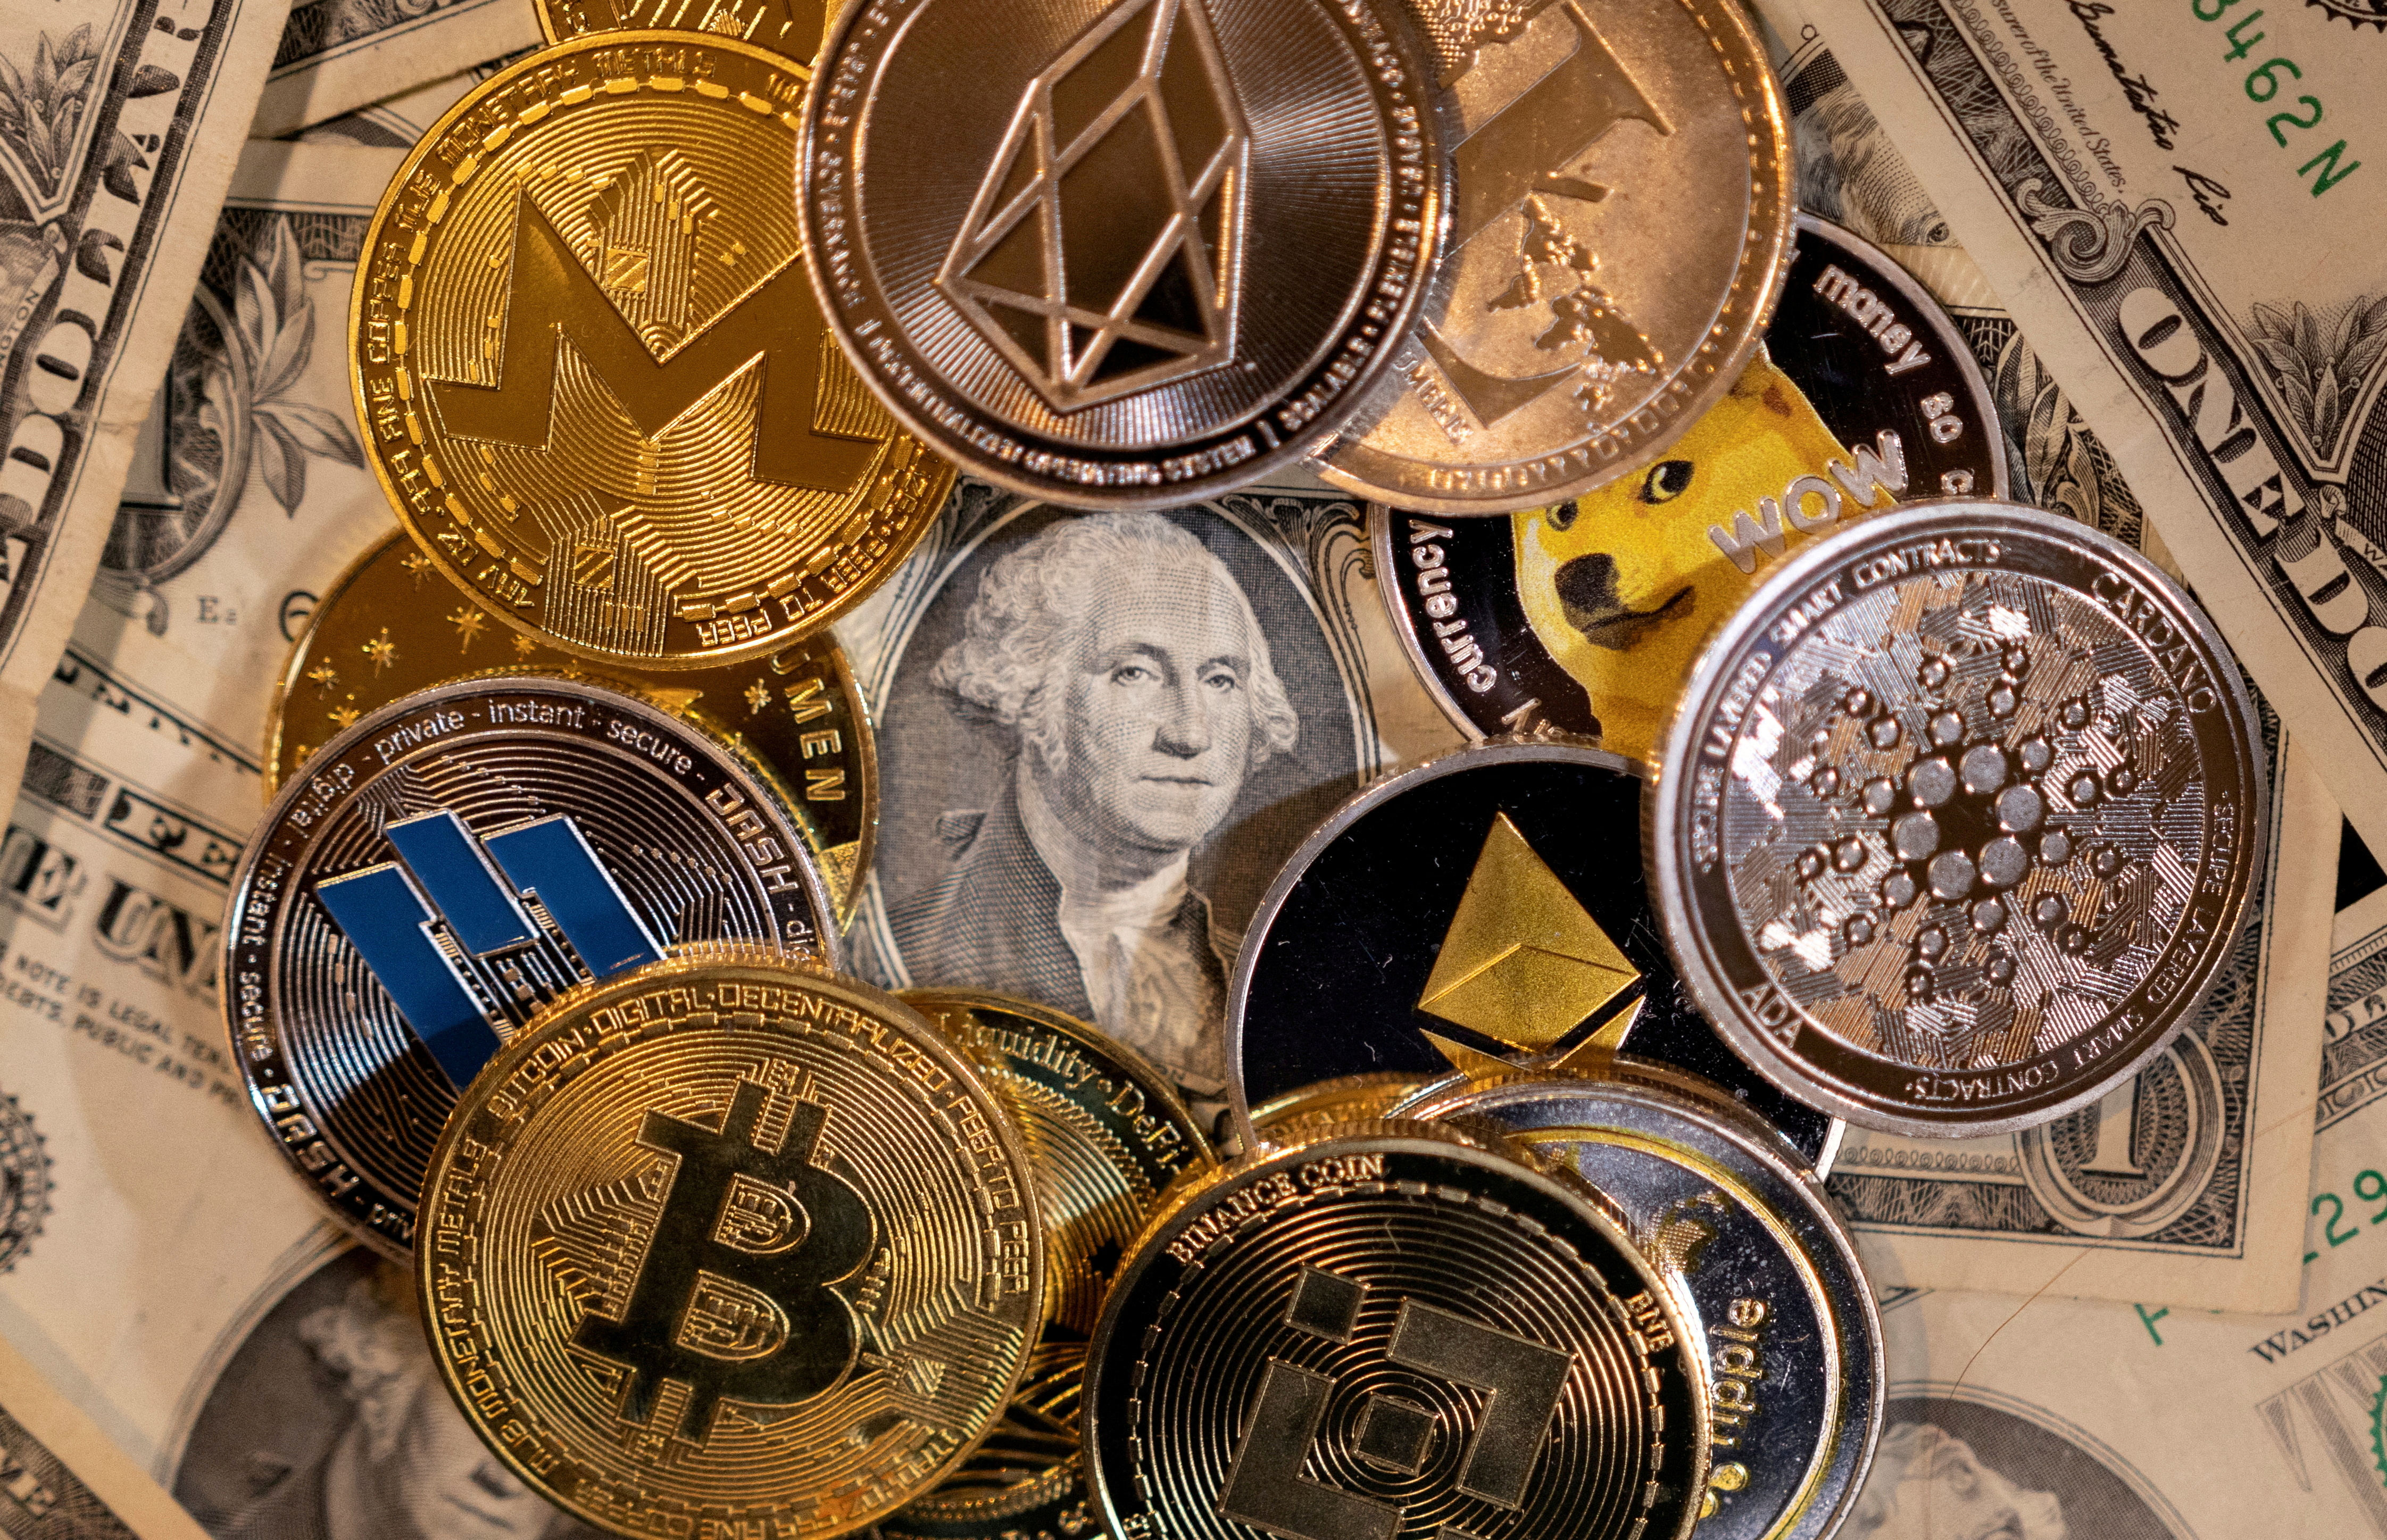 IIlustration shows representations of virtual cryptocurrencies on U.S. Dollar banknotes